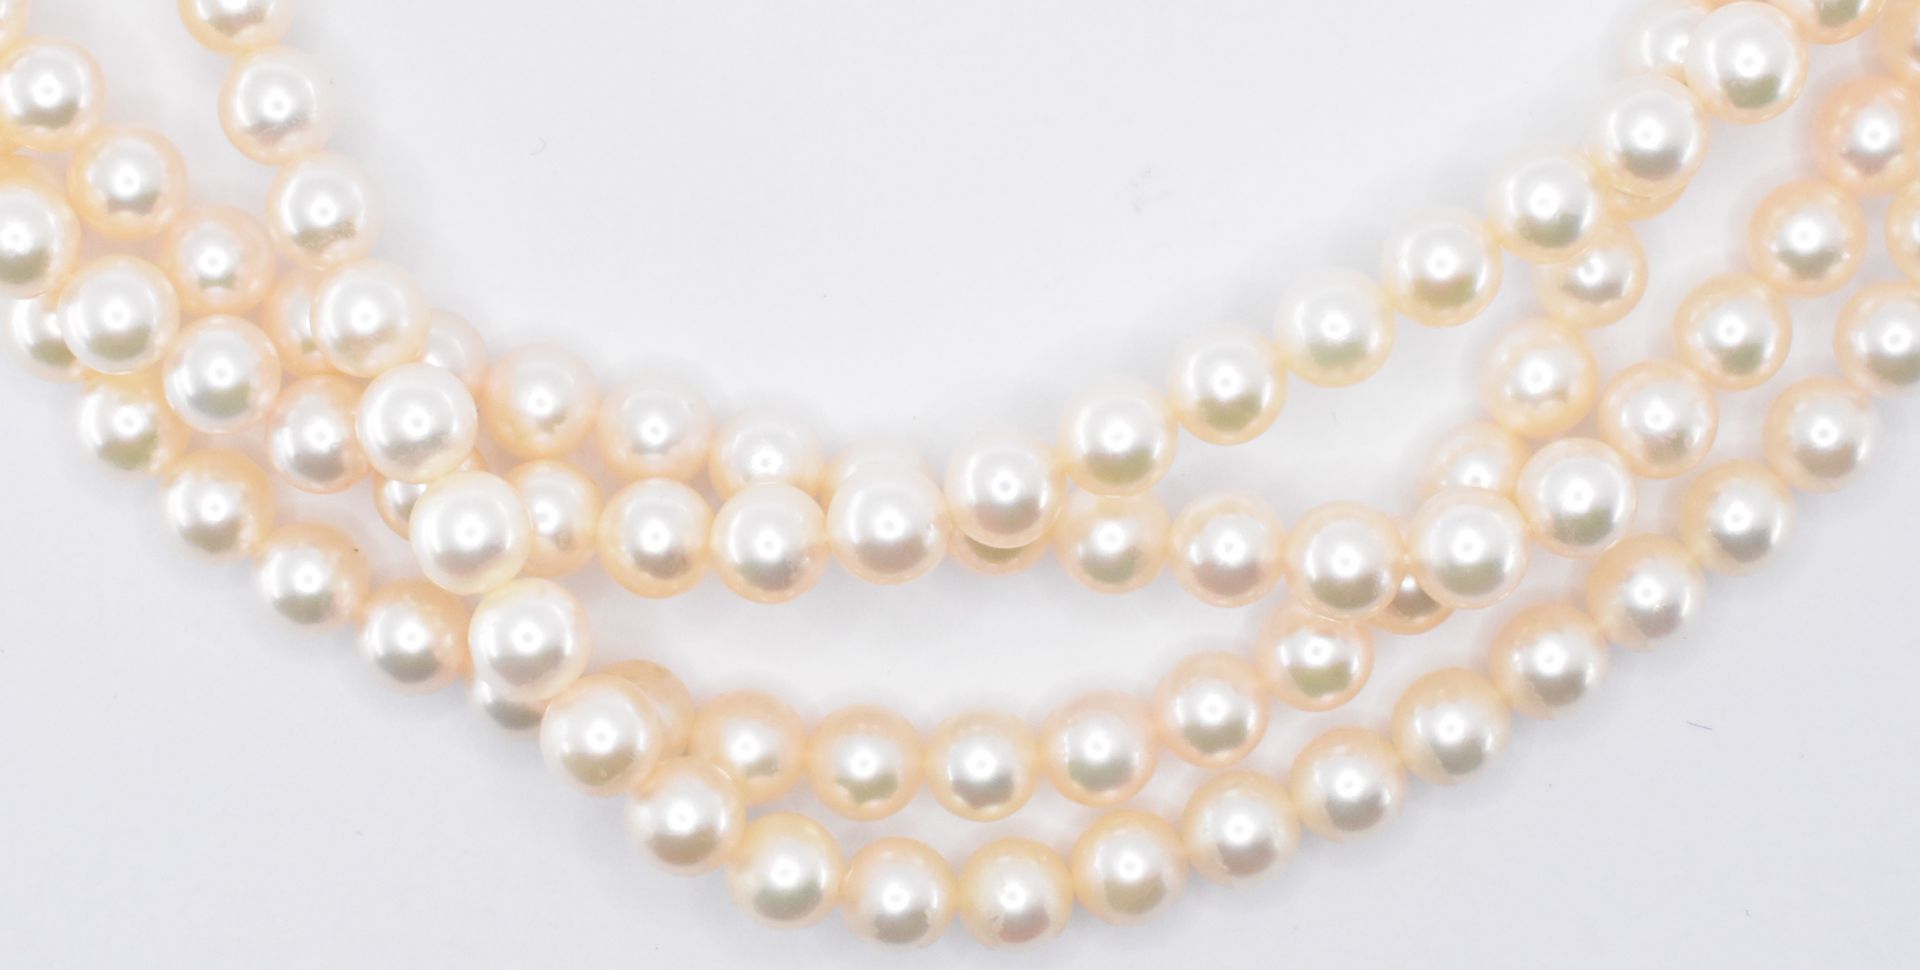 18CT GOLD & CULTURED PEARL FOUR STRAND NECKLACE - Image 4 of 5